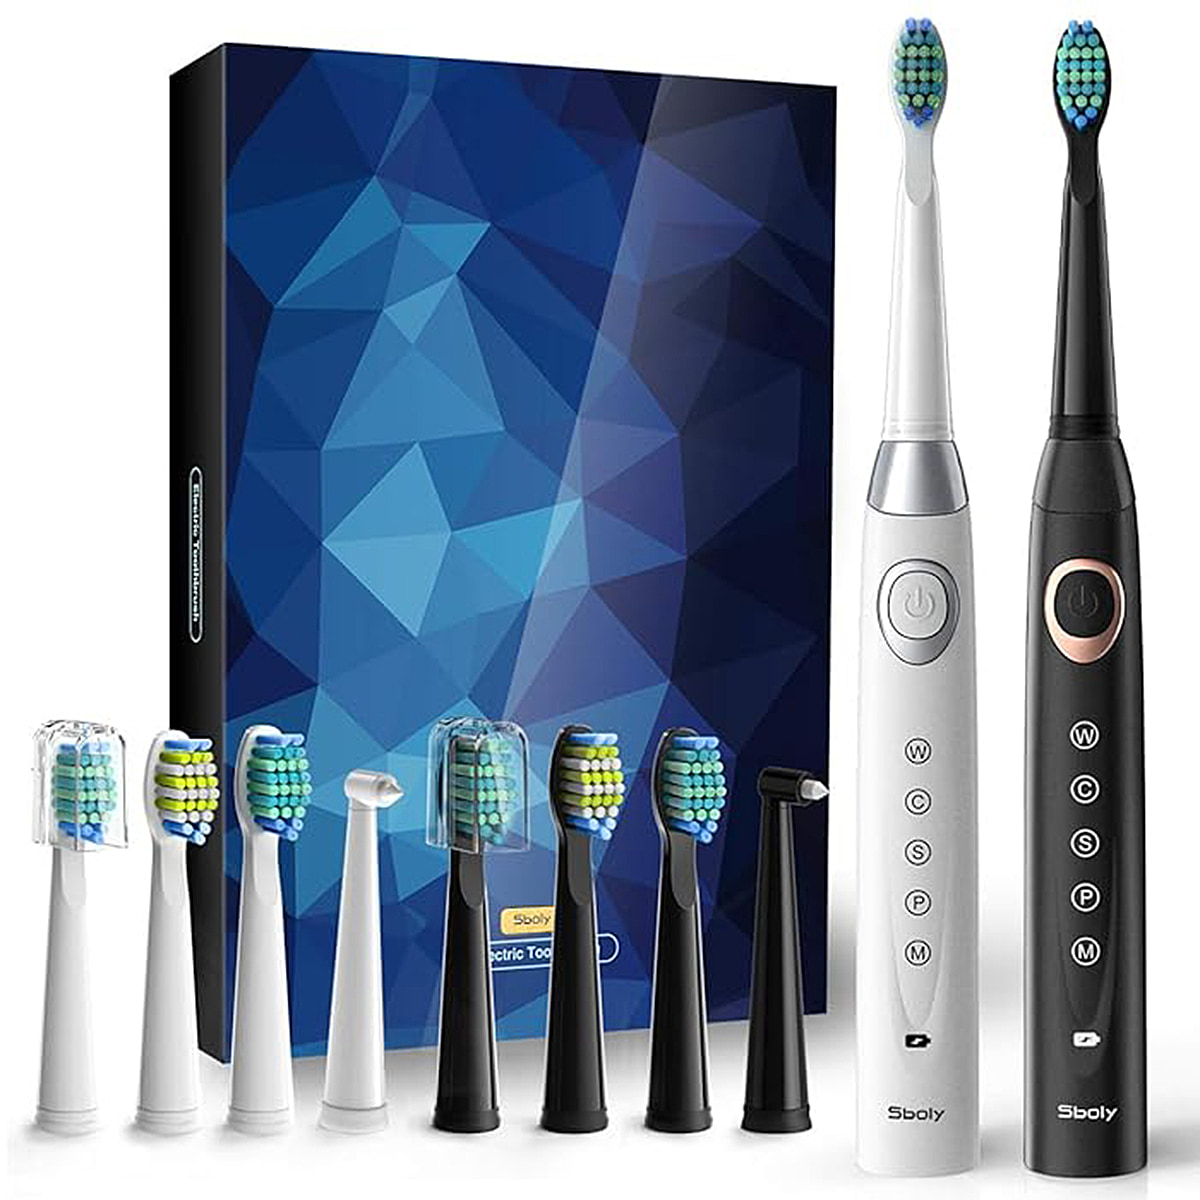 Set Of 2 Sonic Toothbrushes with 8 Replacement Heads - 40,000 Strokes Per Min, 5 Modes, 2 Min Smart Timer, 4Hr Charge - 30 Days Use